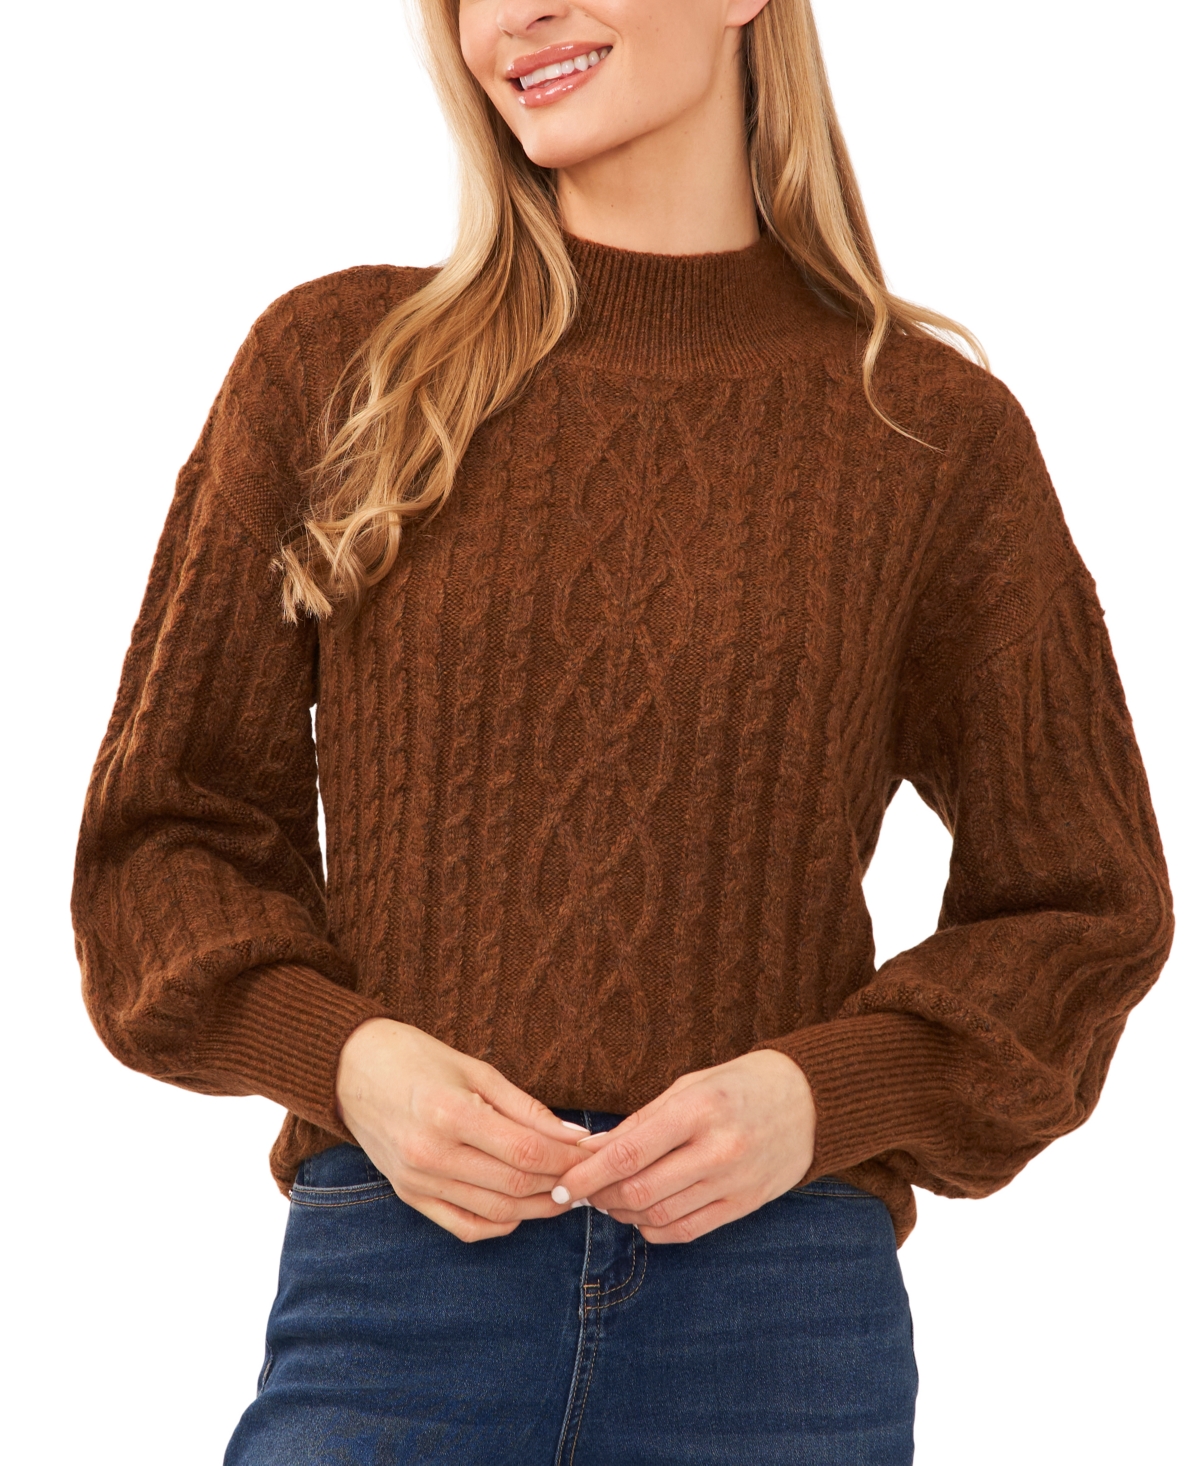 Women's Cable-Knit Mock Neck Bishop Sleeve Sweater - Toasted